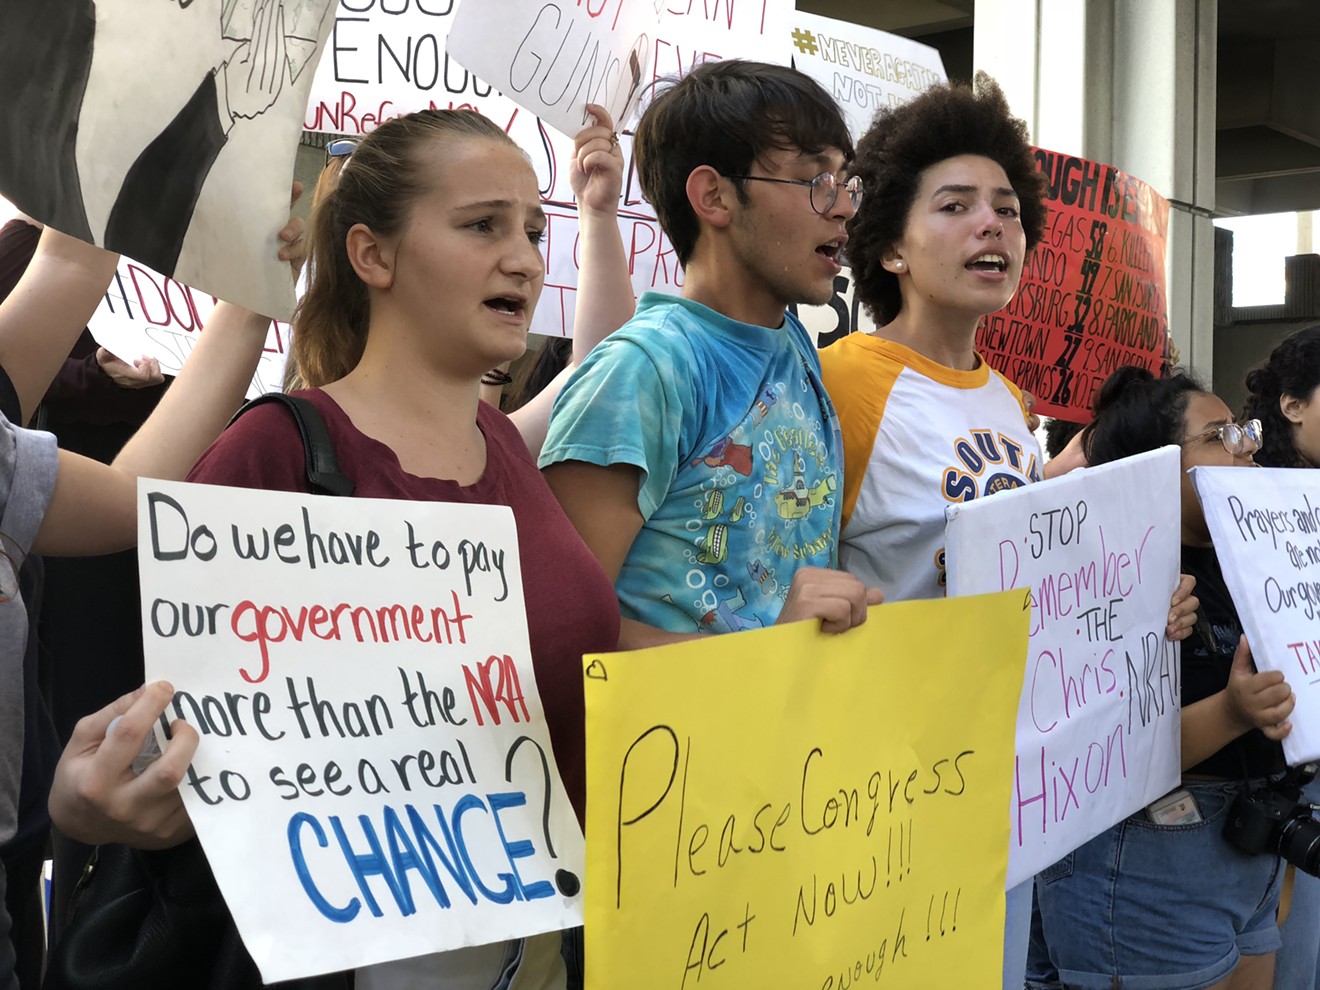 Students rally in support of gun control at a February 17 protest in Fort Lauderdale.